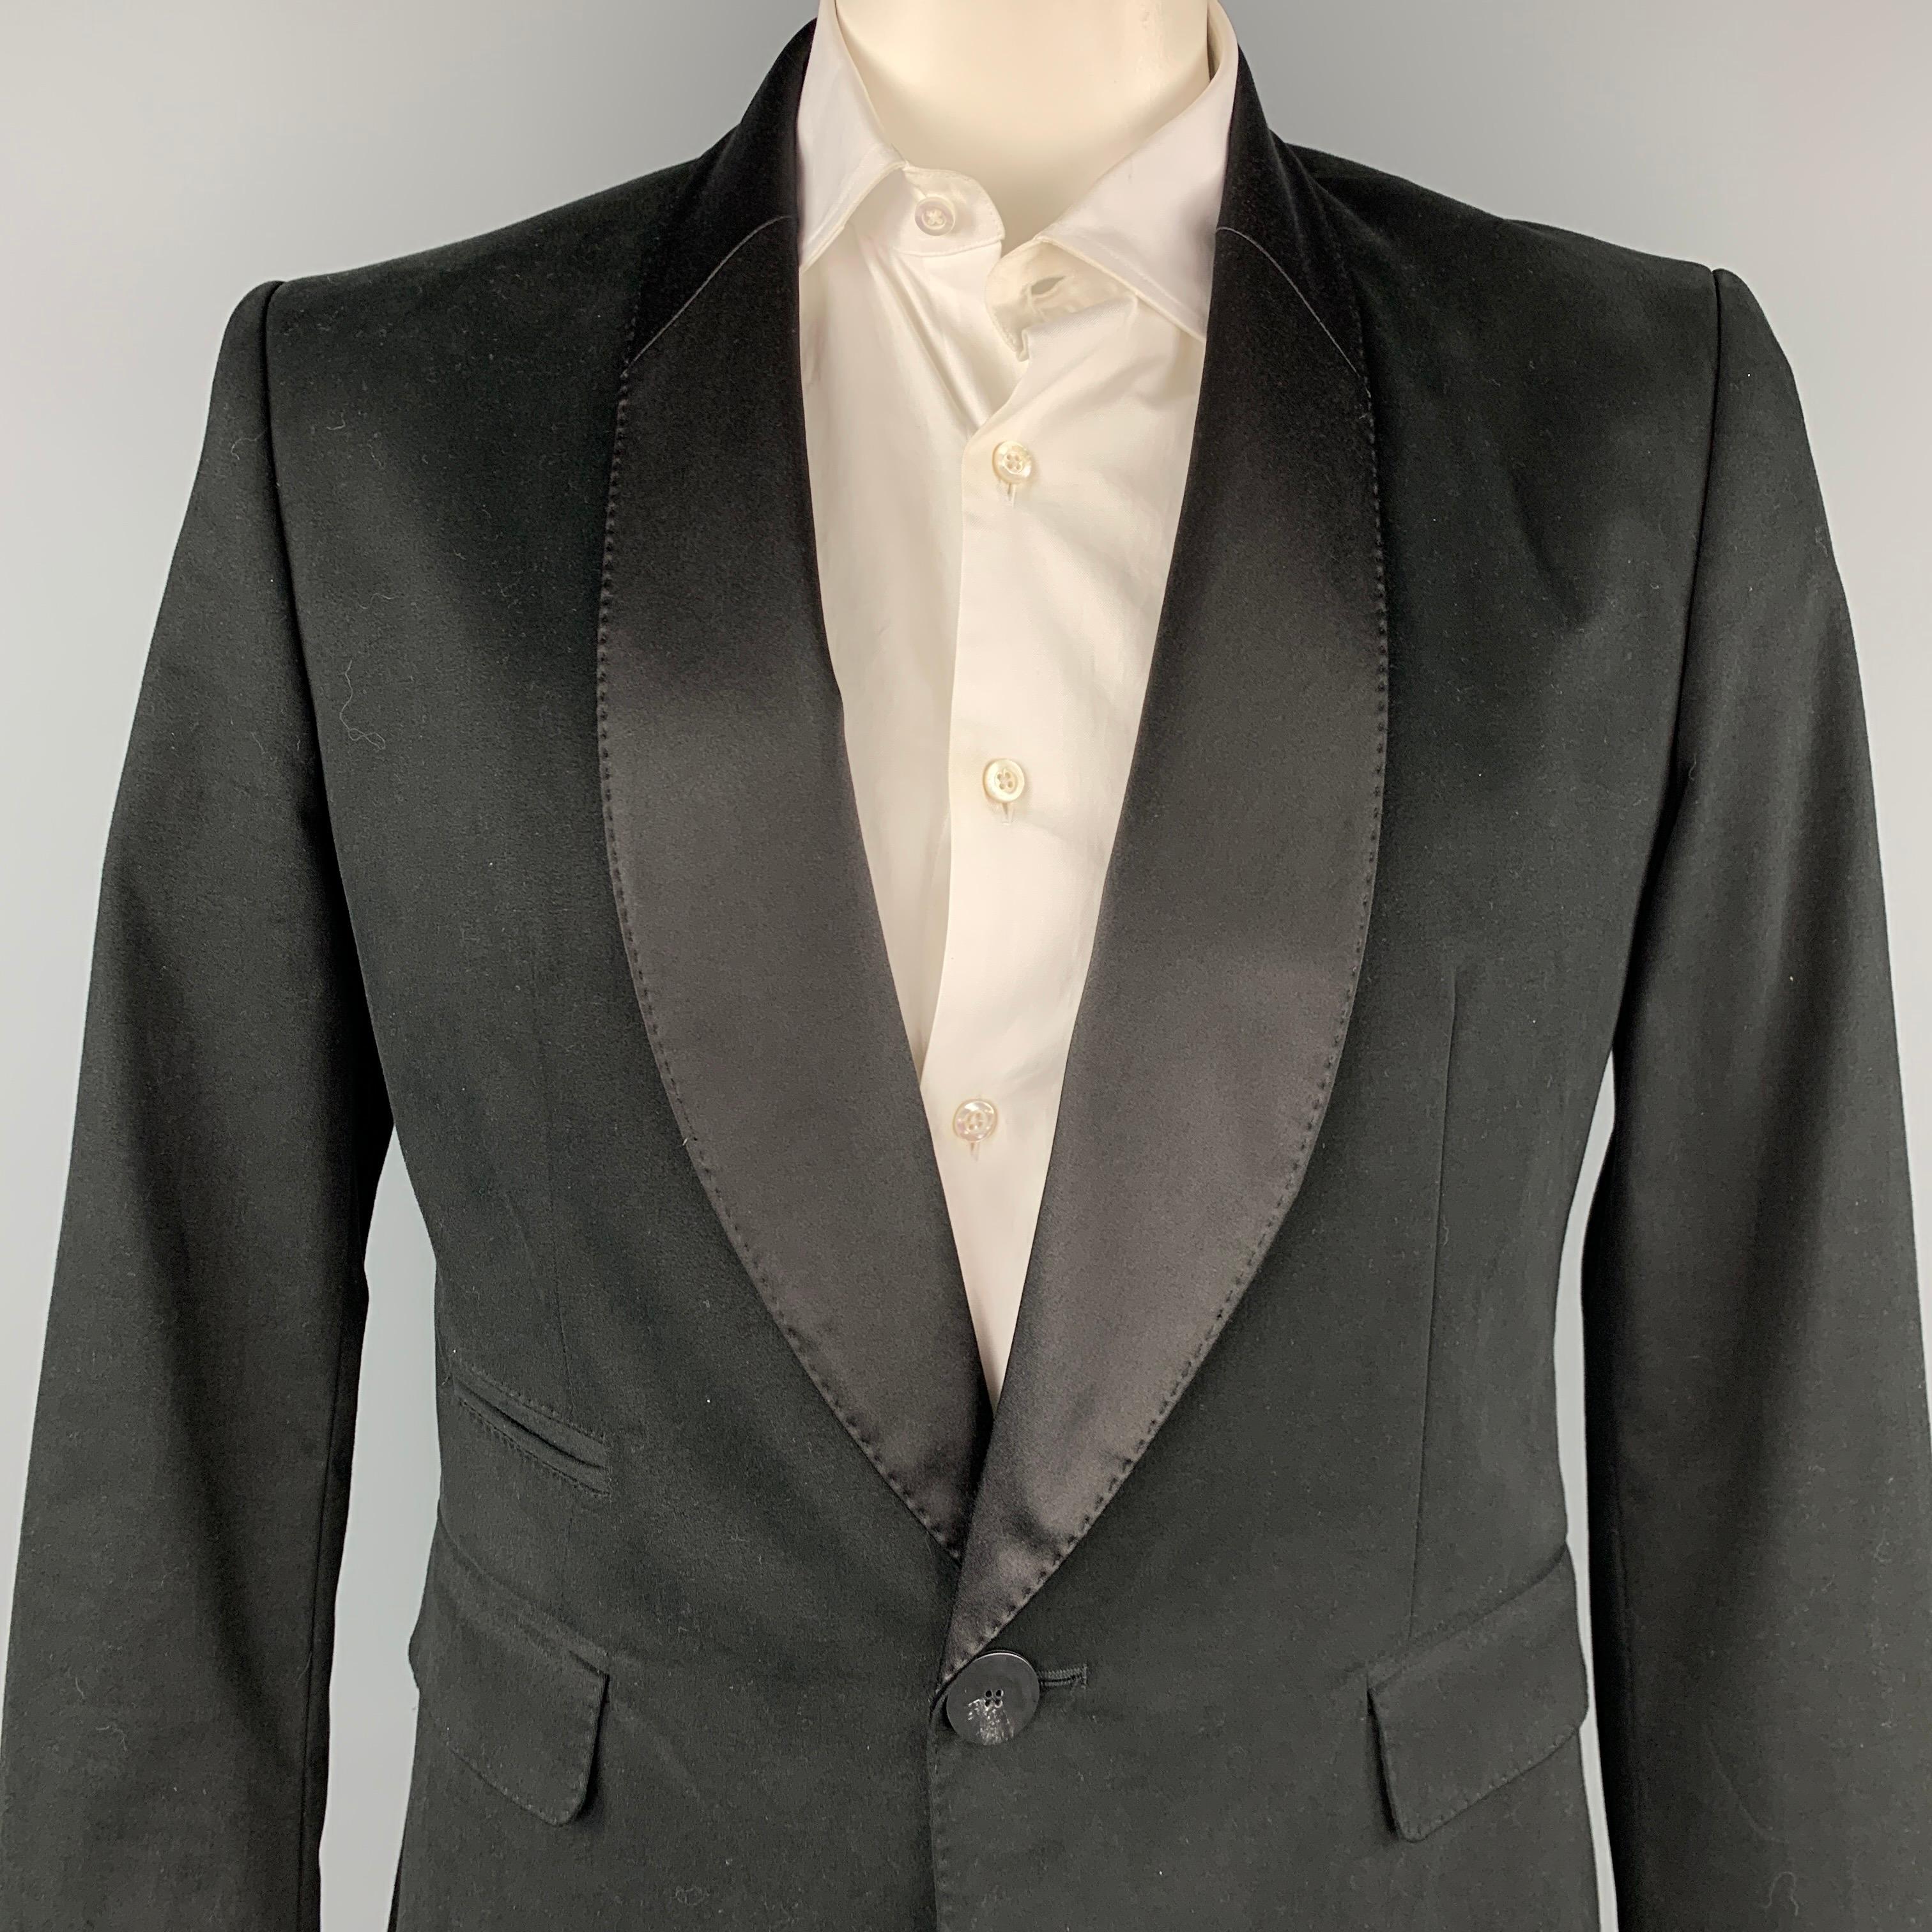 TOM REBL sport coat comes in a black acetate / cotton with a full liner featuring a shawl collar, flap pockets, and a single button closure. Made in Italy.

Very Good Pre-Owned Condition.
Marked: 52
Original Retail Price: